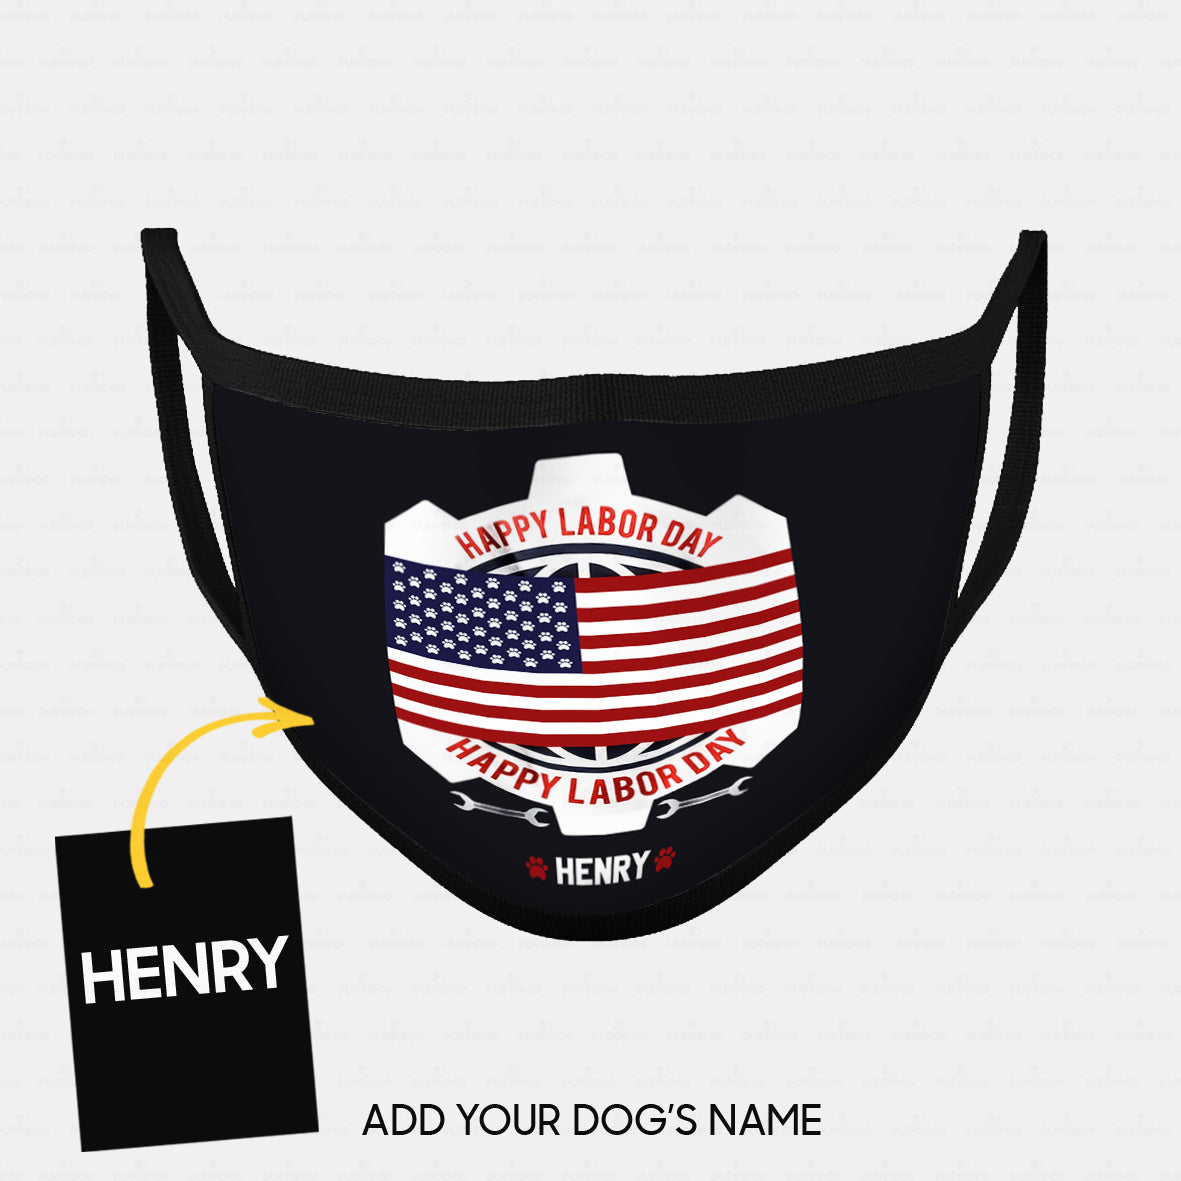 Personalized Dog Mask Gift Idea - Happy Labor Happy America Flag In The Middle For Dog Lovers - Cloth Mask